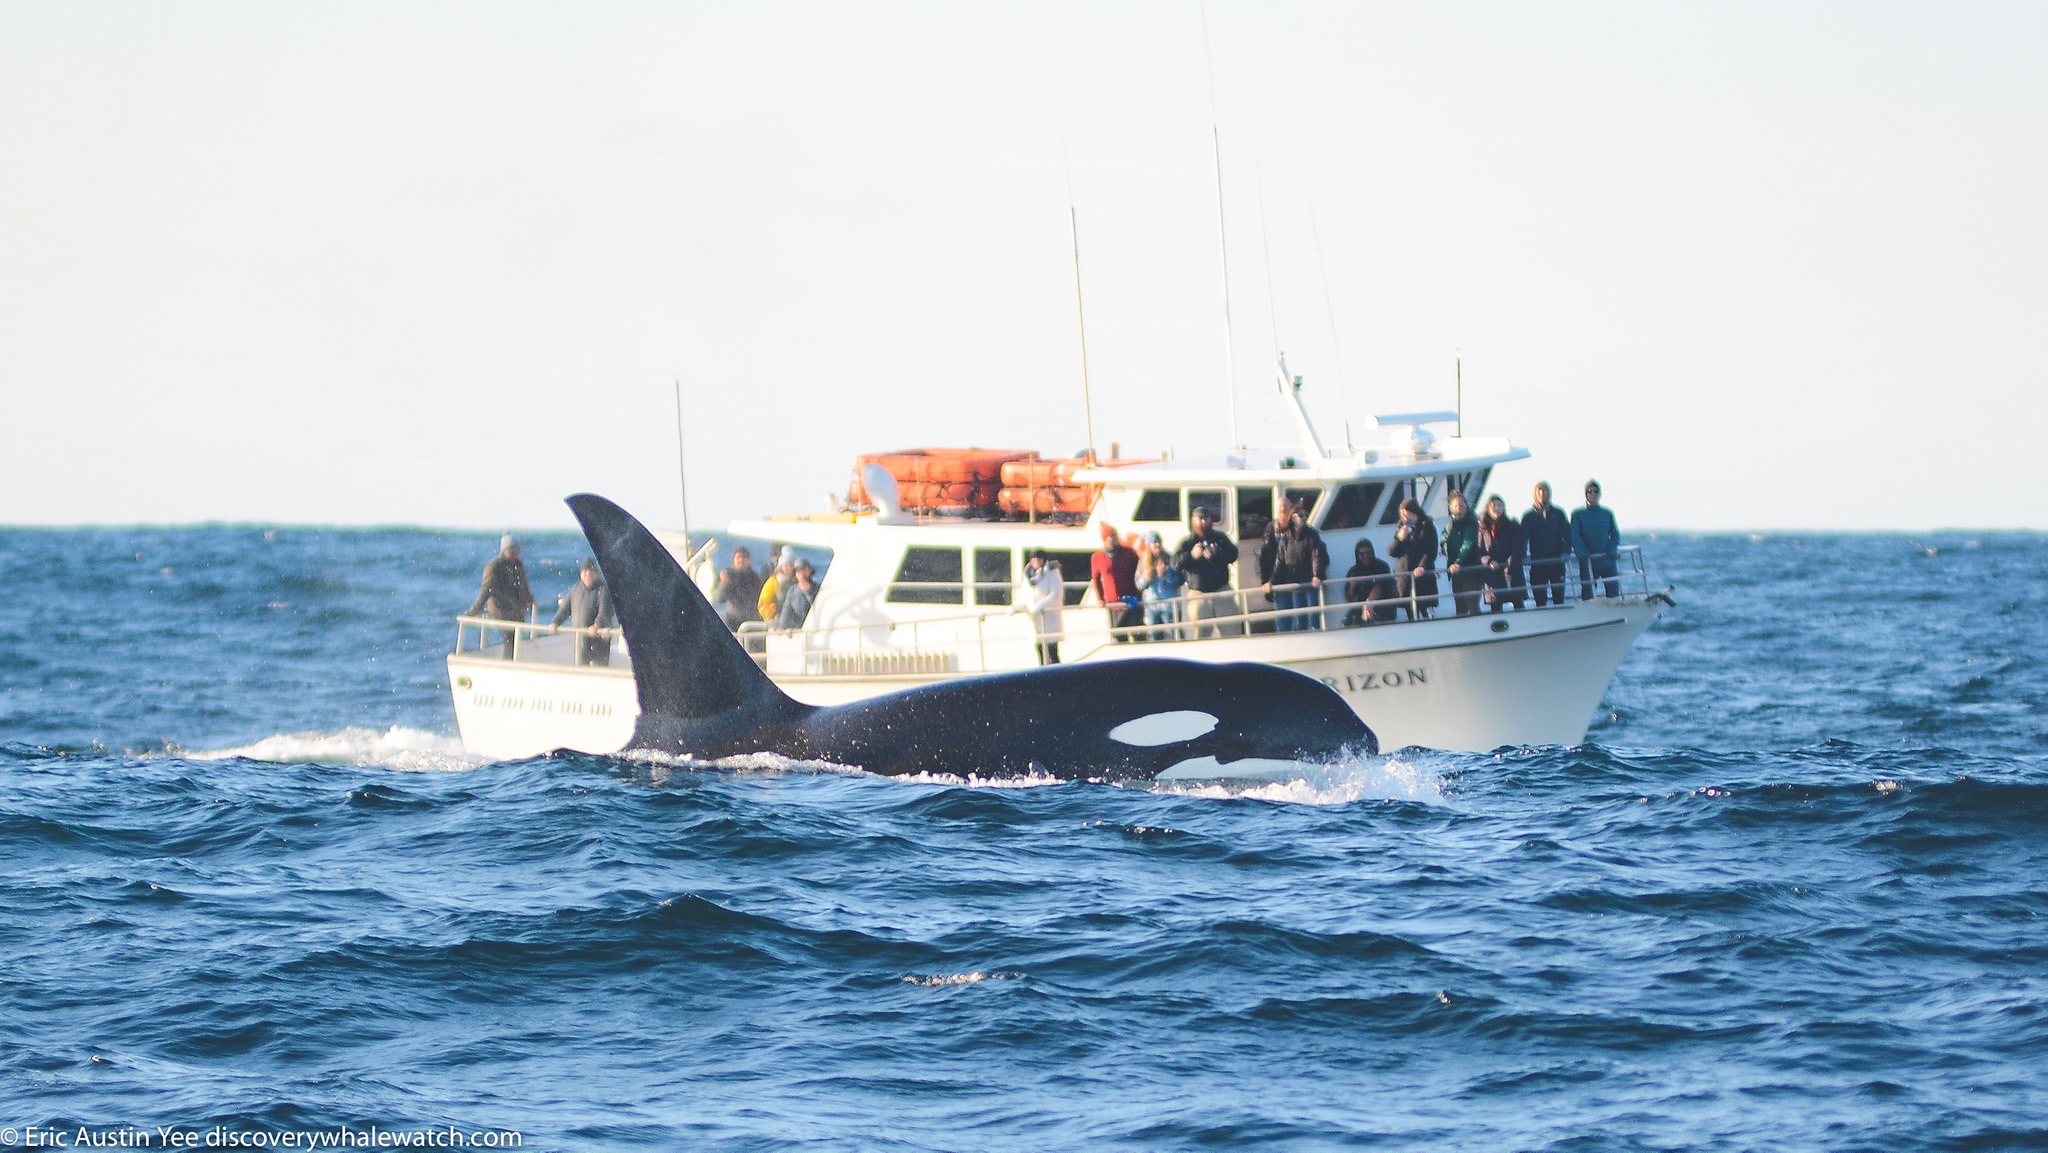 Elding Adventure at Sea - Iceland Whale Watching